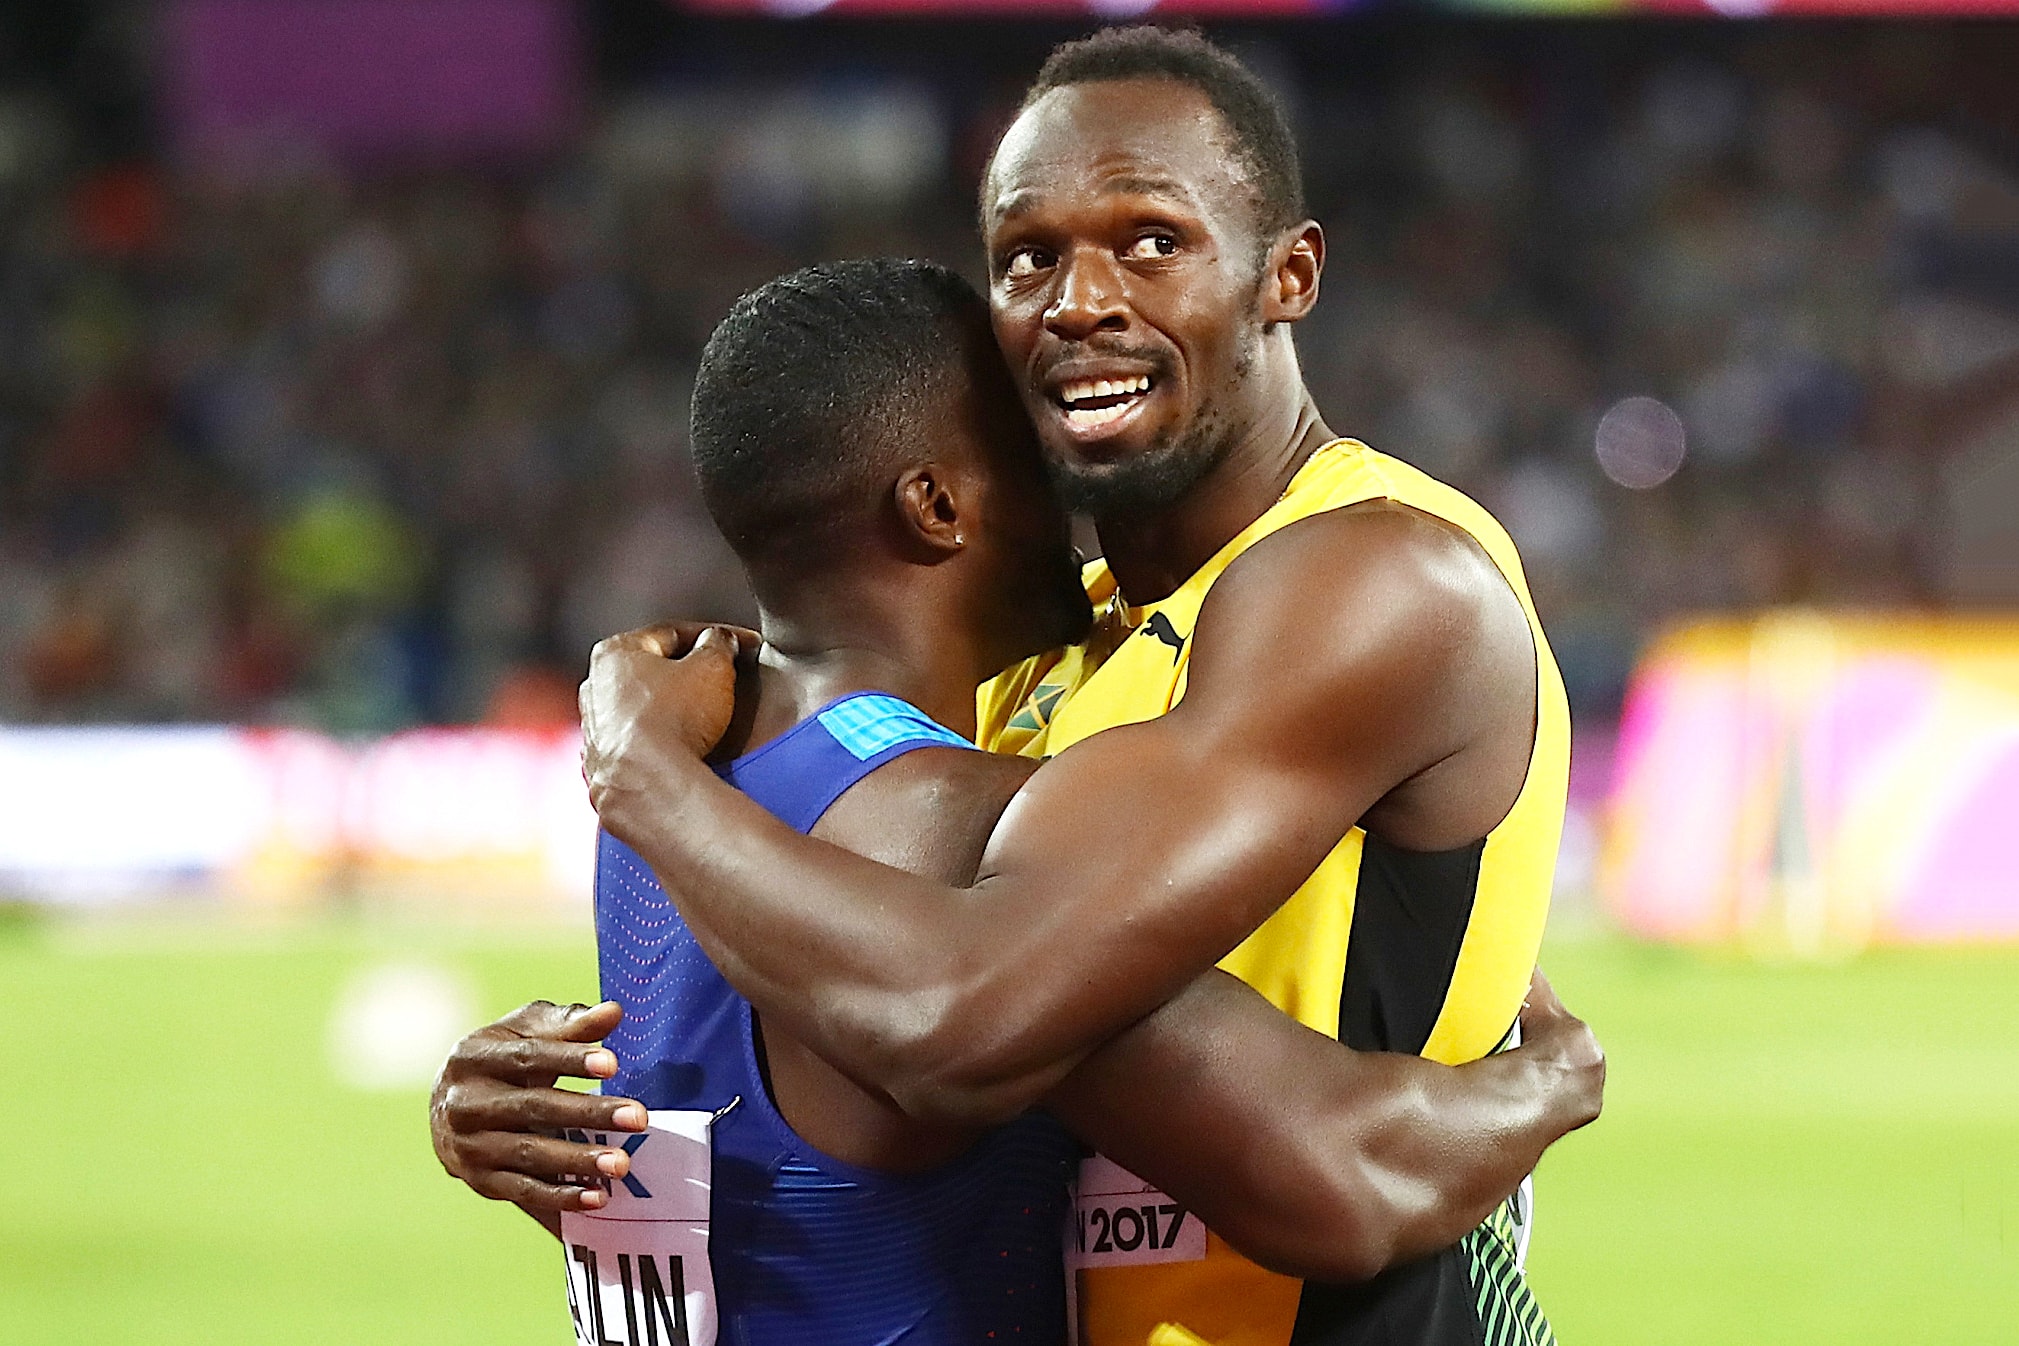 Usain Bolt Lost His Last 100 Meter Race